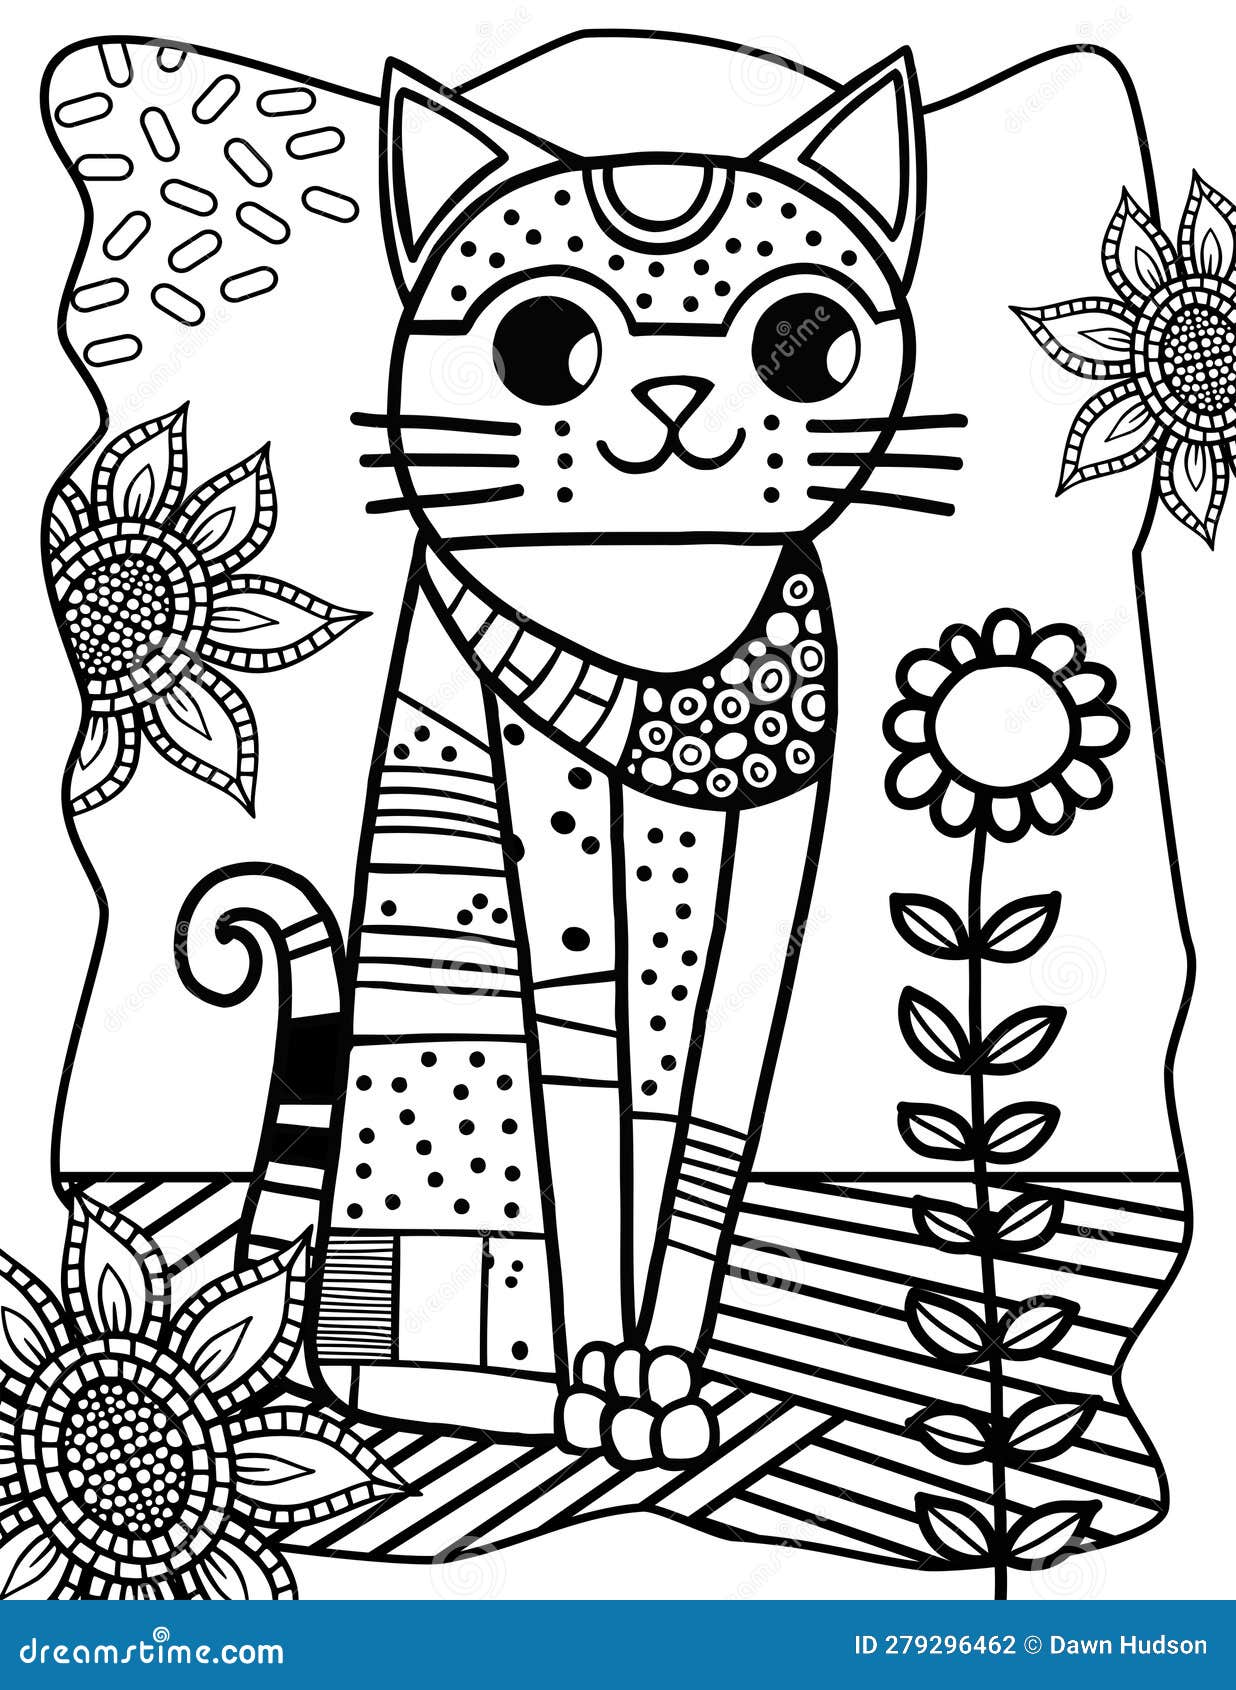 Patchwork Cat in the Garden Fun Coloring Page Portrait Stock Vector ...